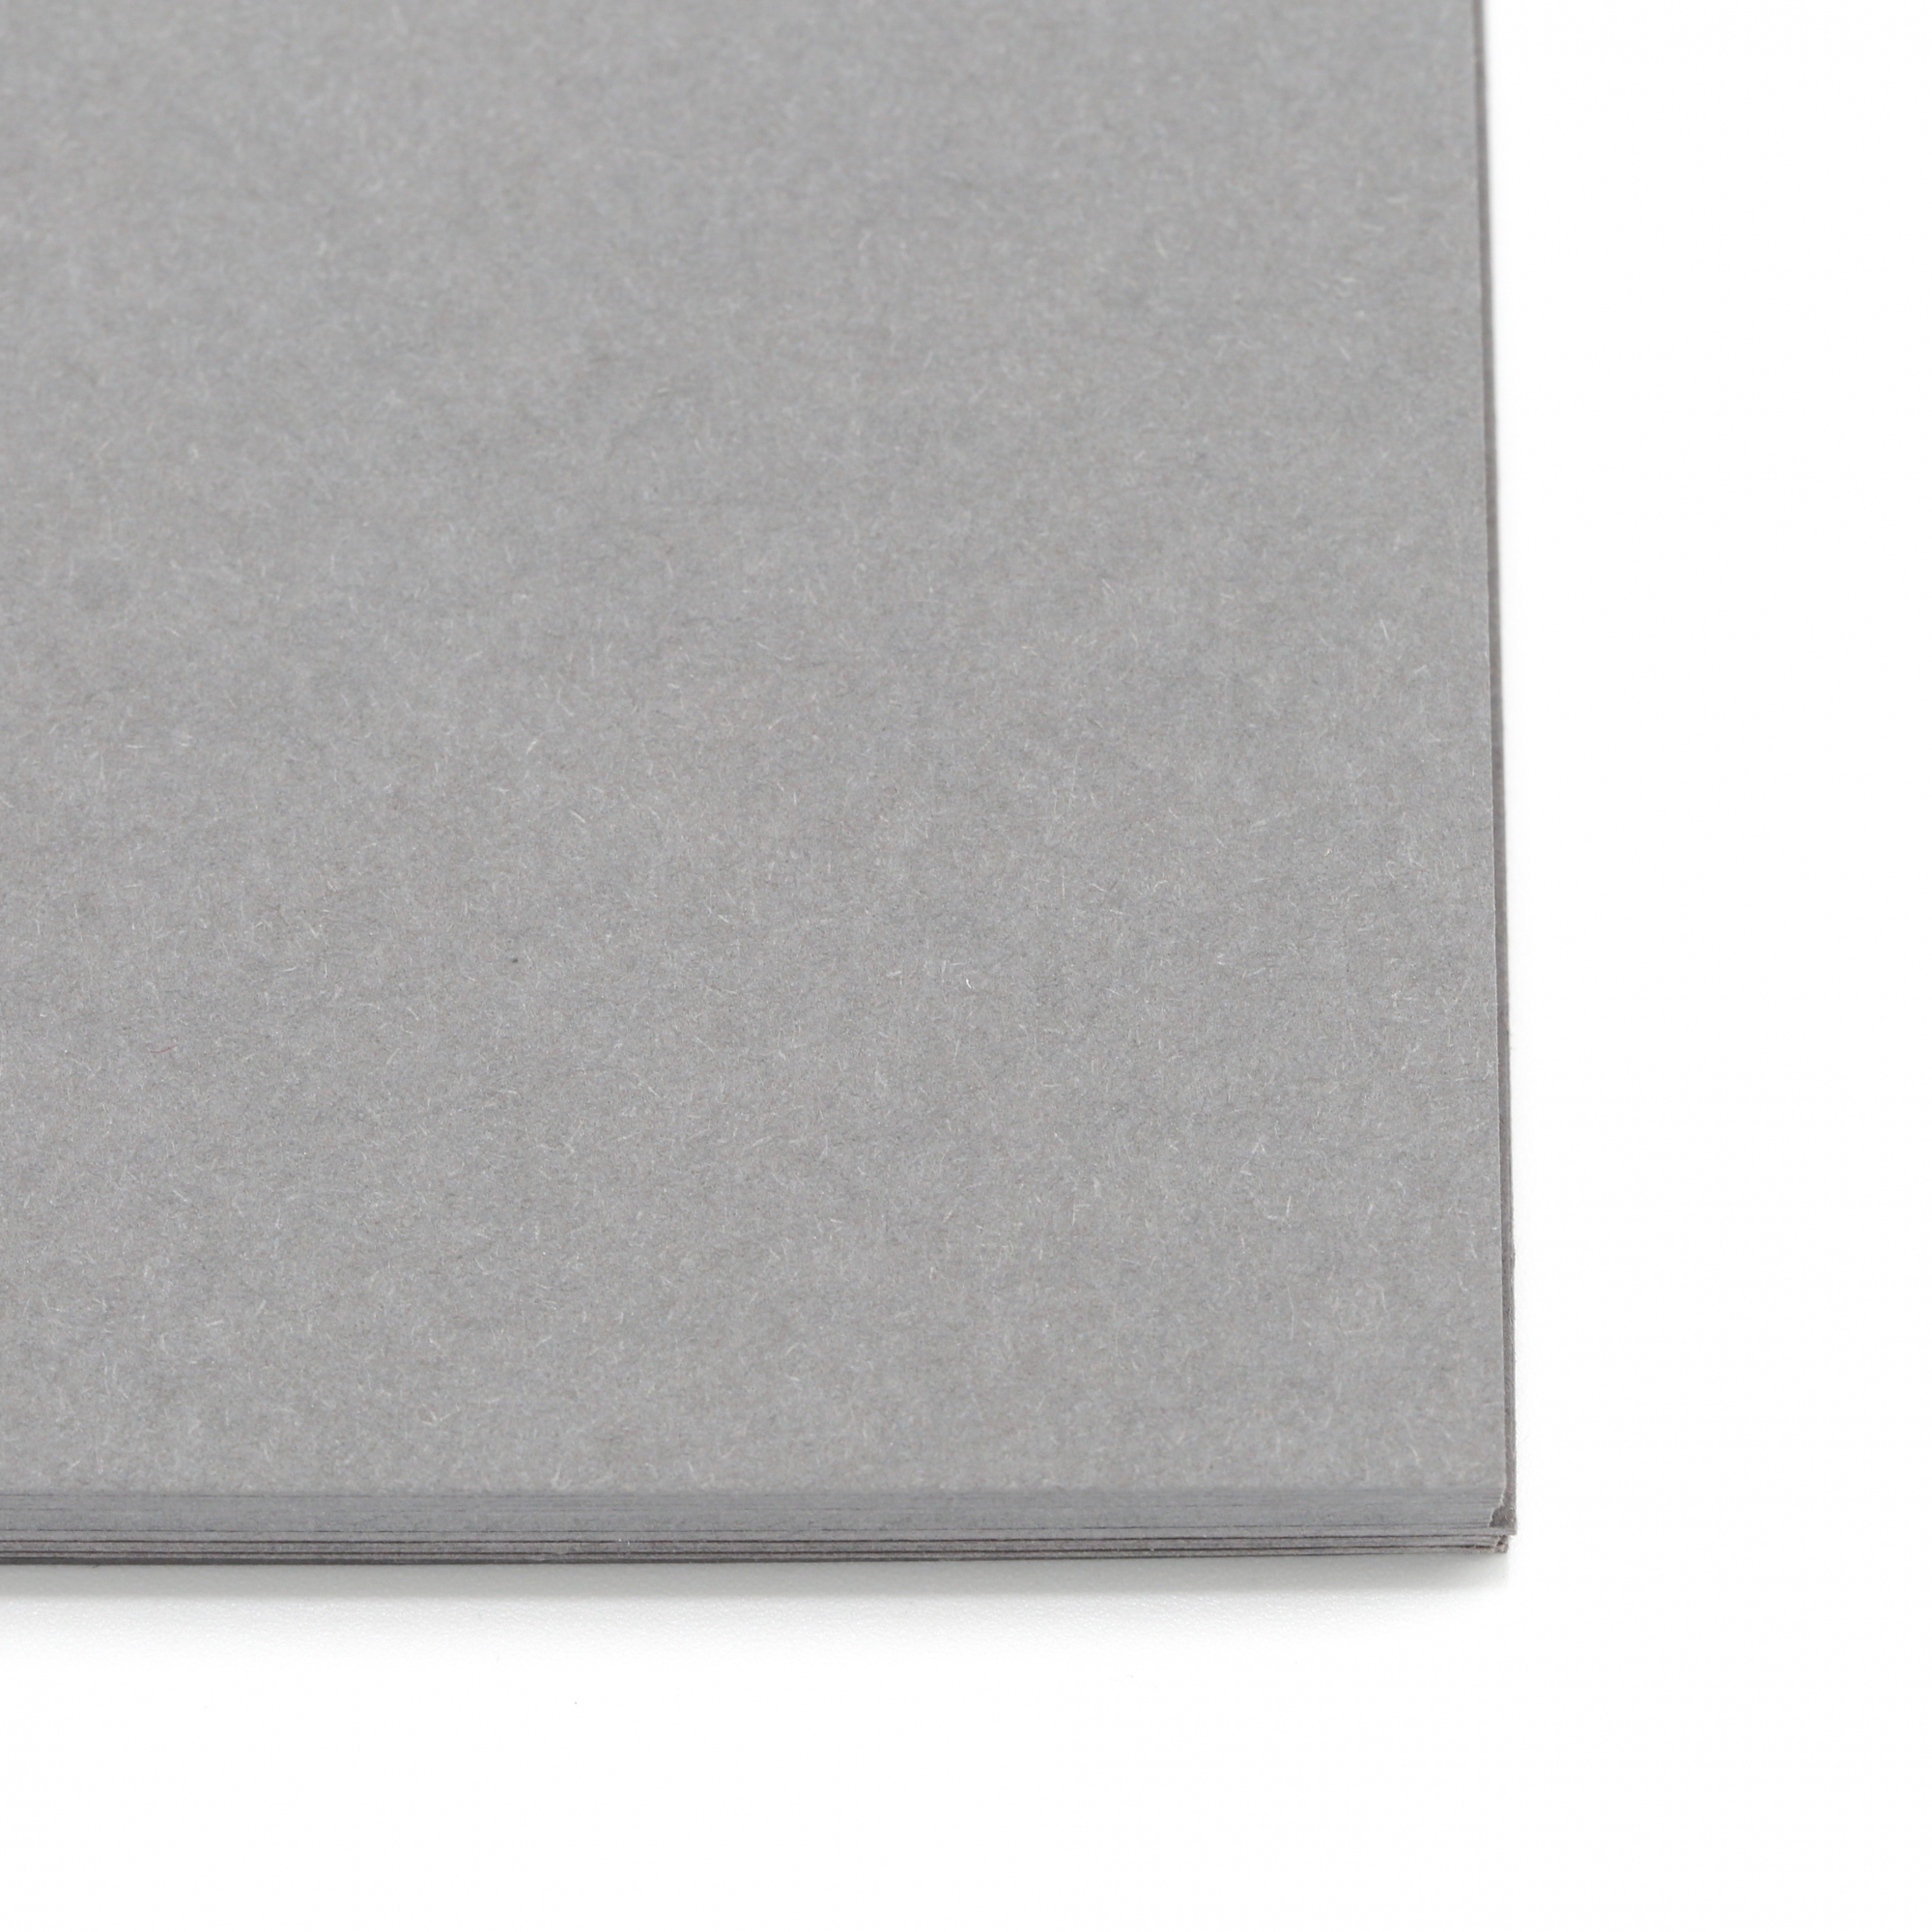 Colorplan Dark Grey 11 x 17 200# Cover Sheets Pack of 50